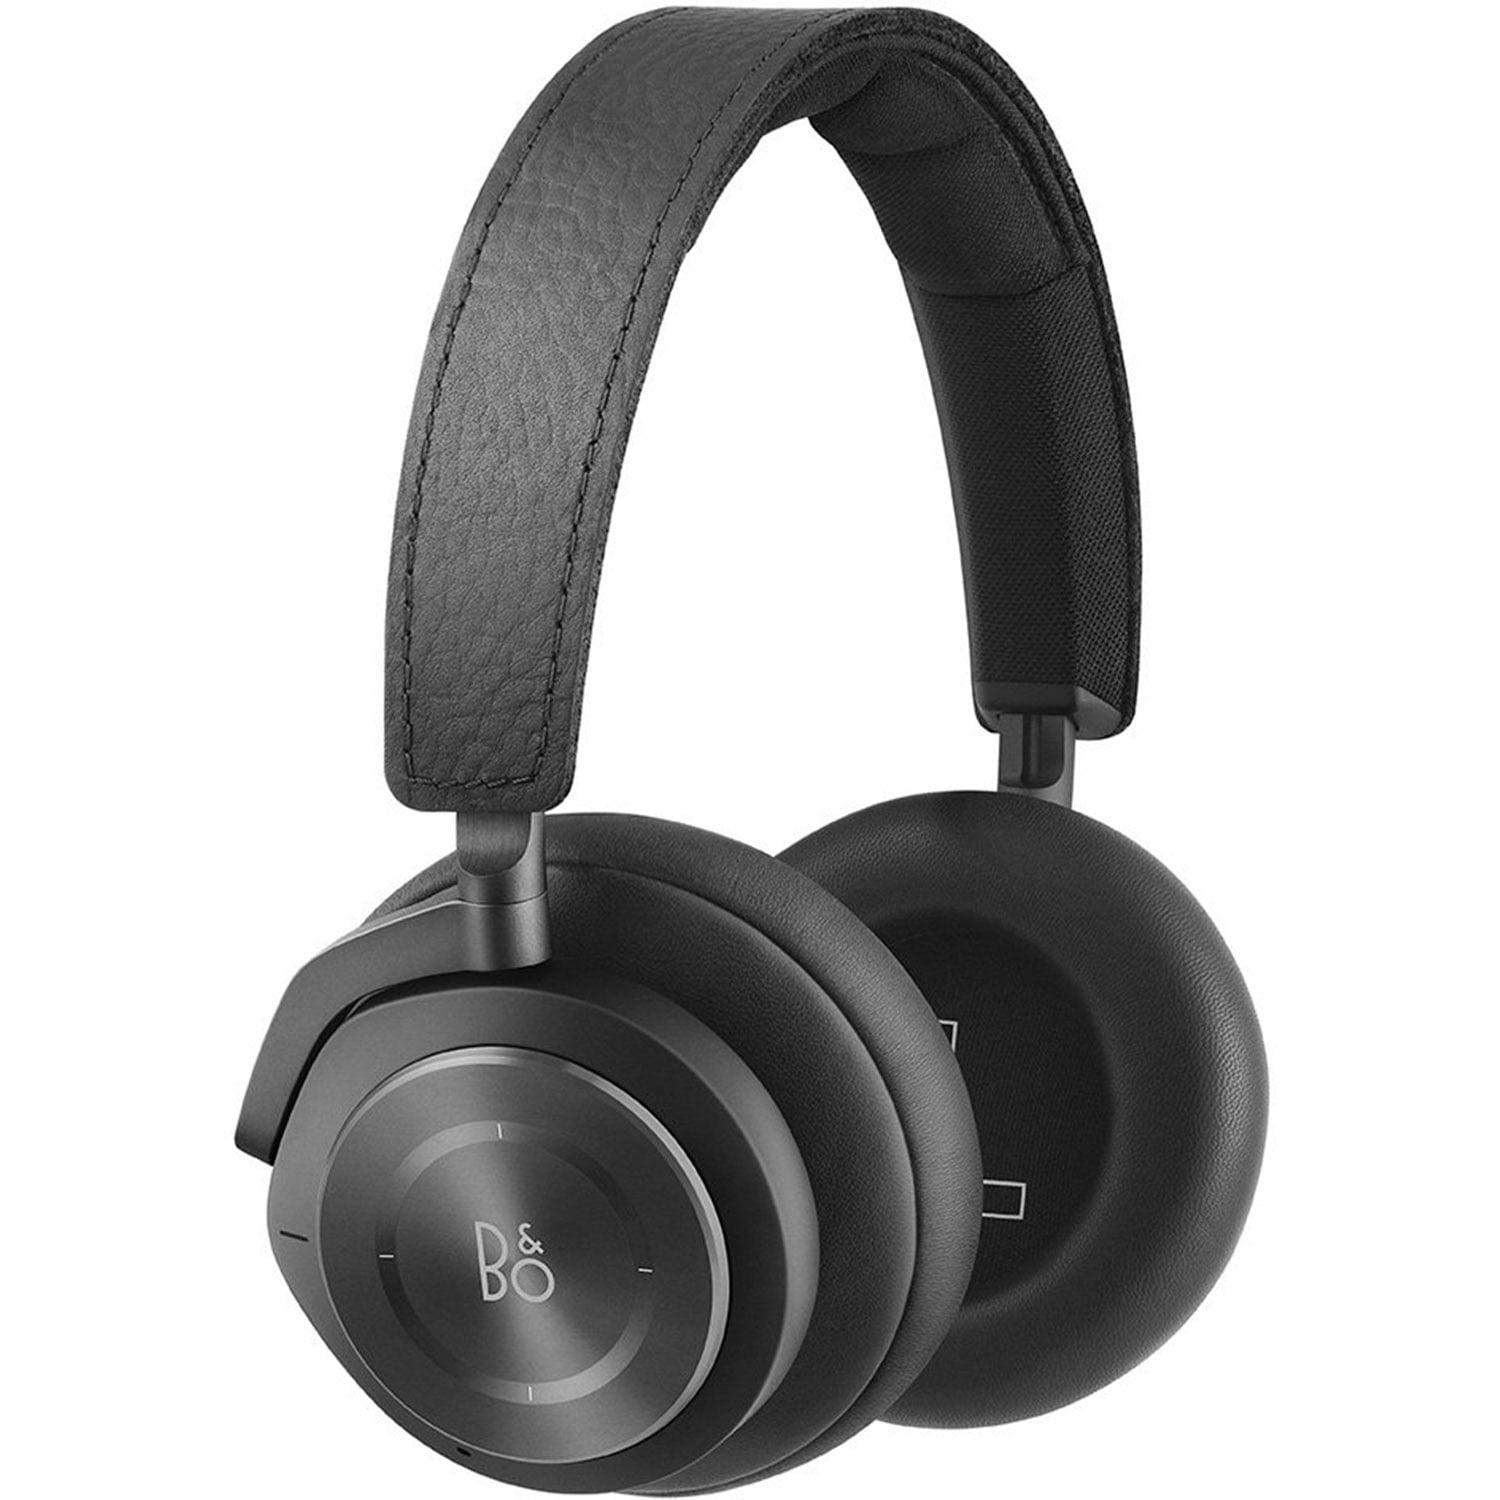 Bang & Olufsen Beoplay H9i Wireless Bluetooth Over-Ear with Active Noise Cancellation, Mode and Microphone - Black - 1645026 - Walmart.com